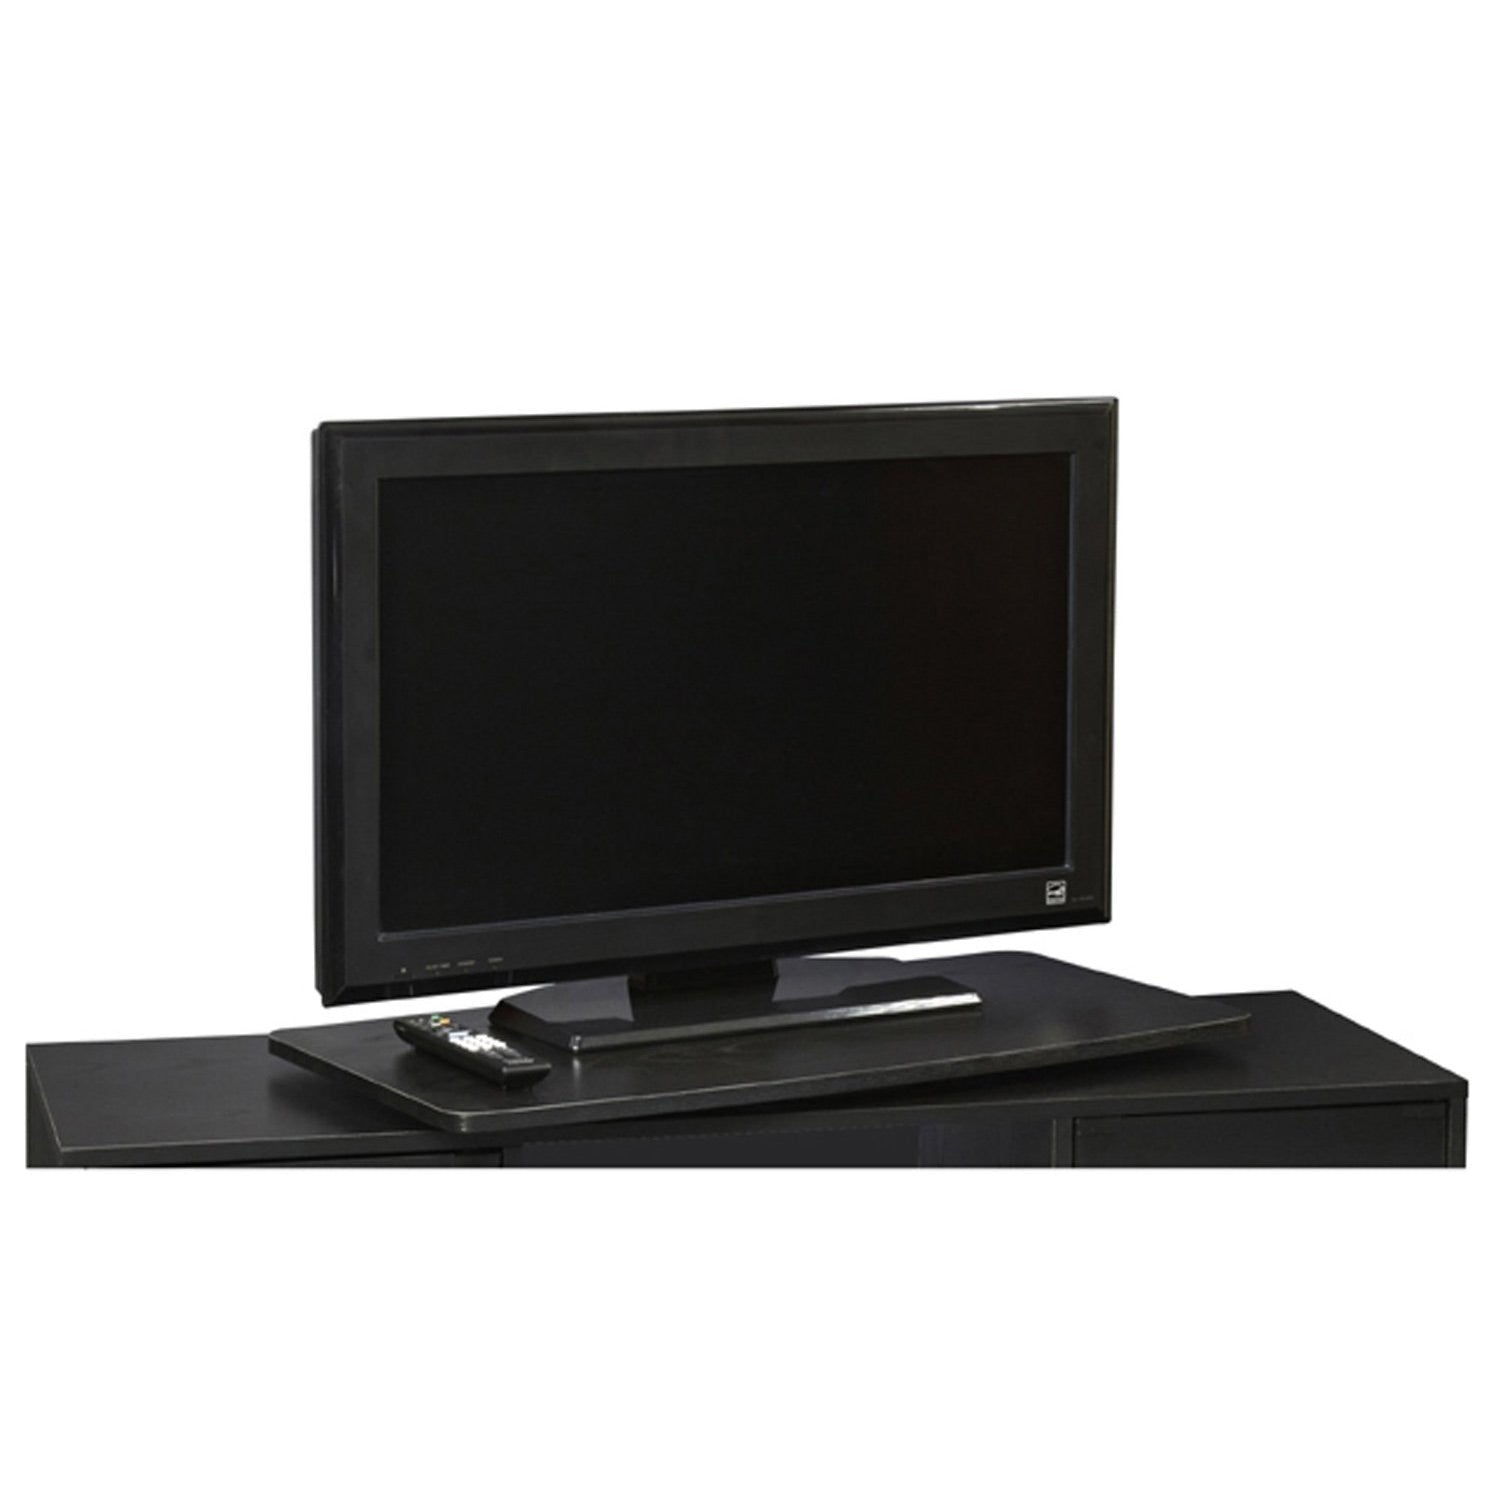 Living Room > TV Stands And Entertainment Centers - TV Swivel Board For Flat Screen TV Or Monitor Up To 32-inch